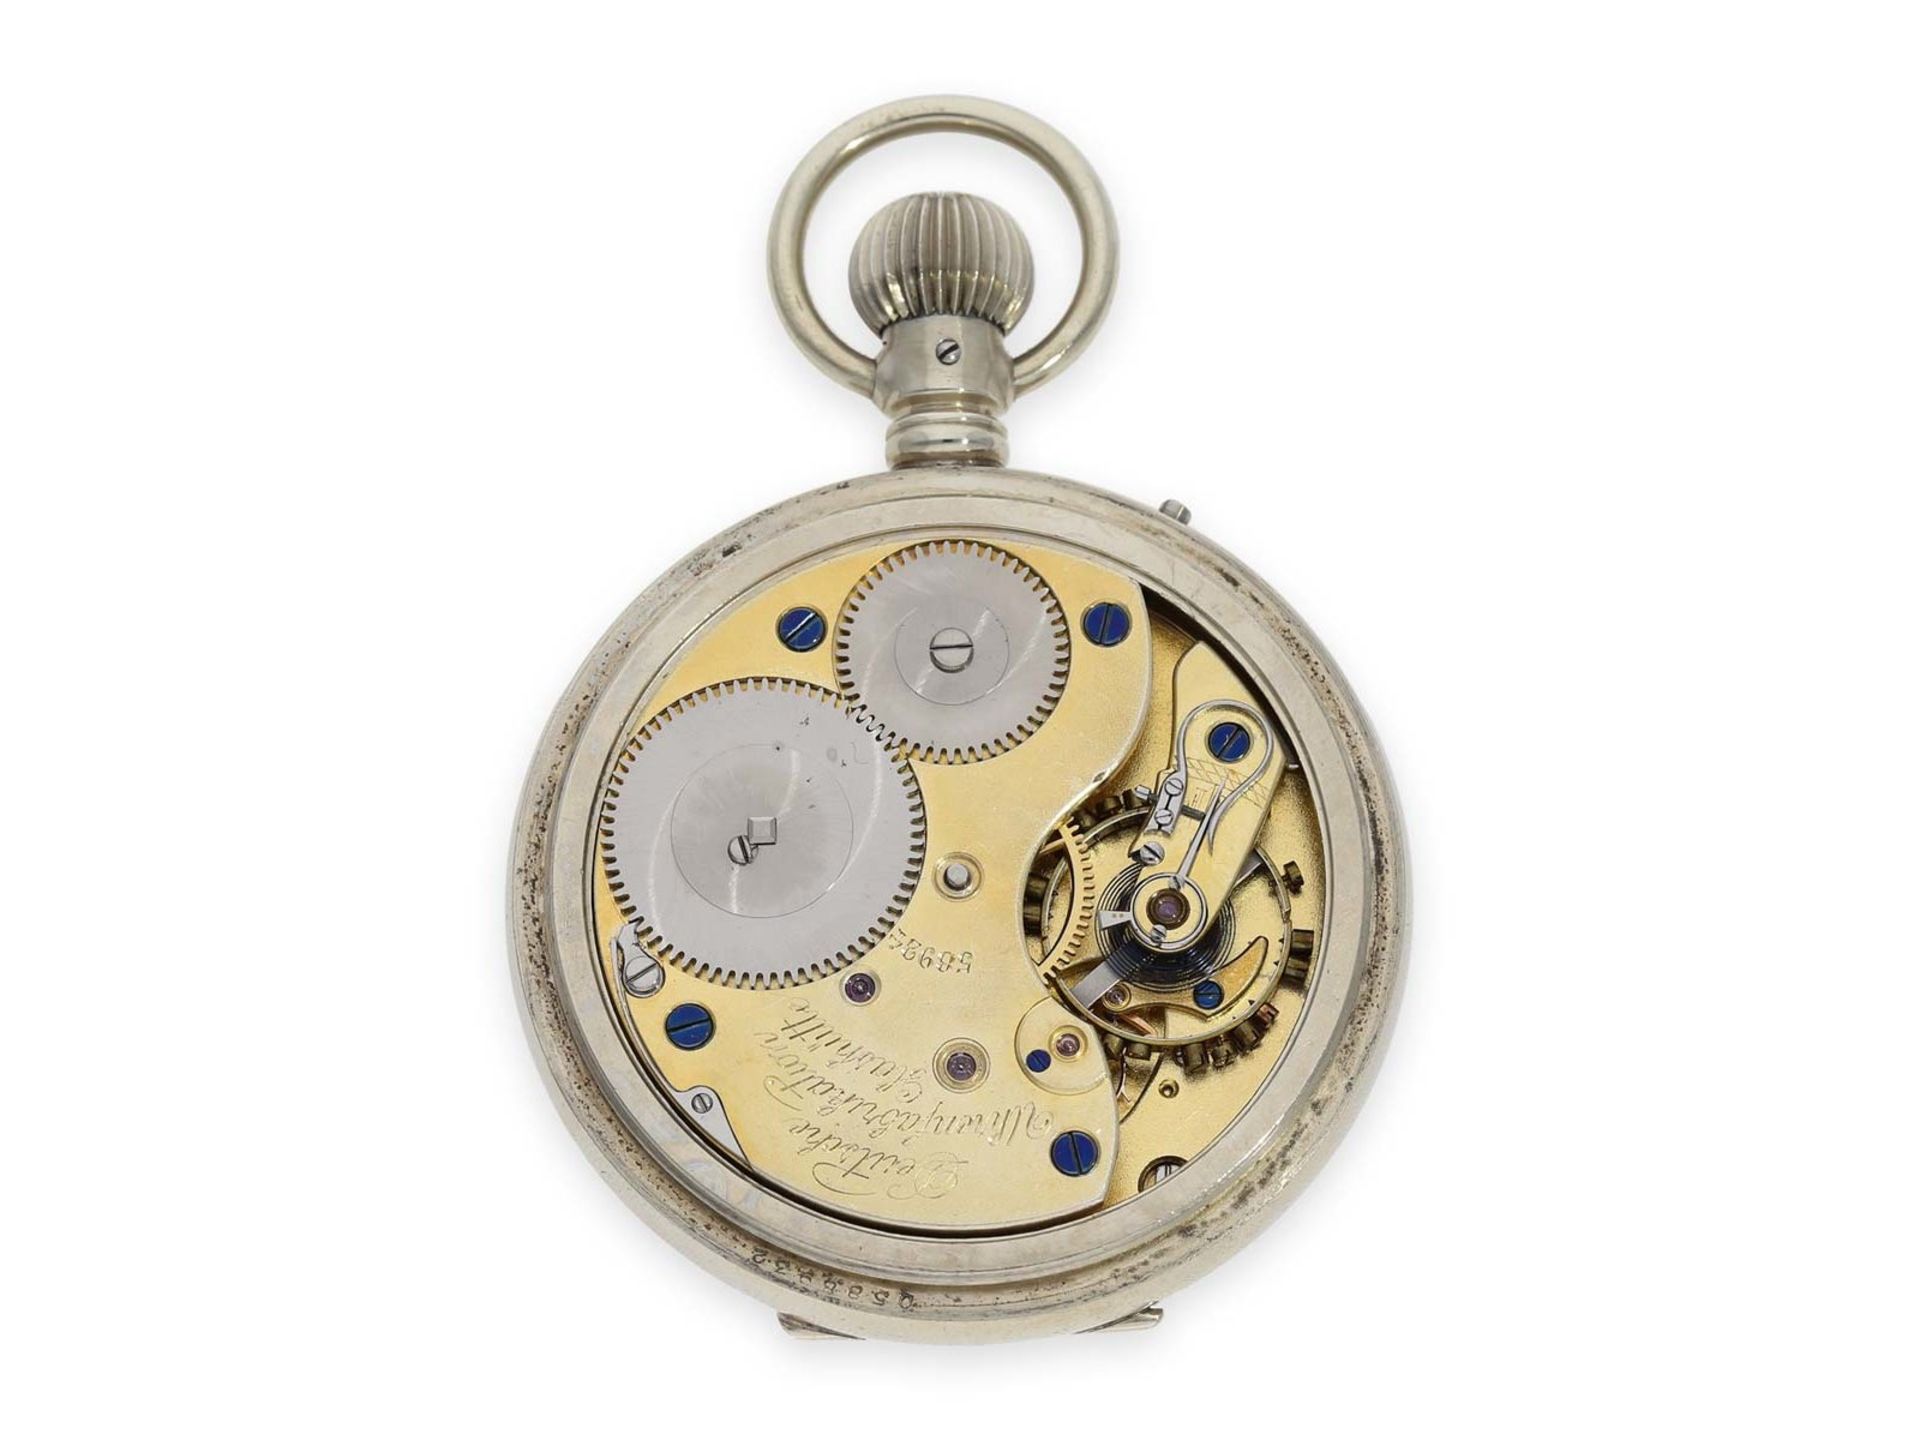 Pocket watch: Glashütte rarity, A. Lange & Söhne pocket watch with 24-hours dial, 1 of only 10 - Image 2 of 4